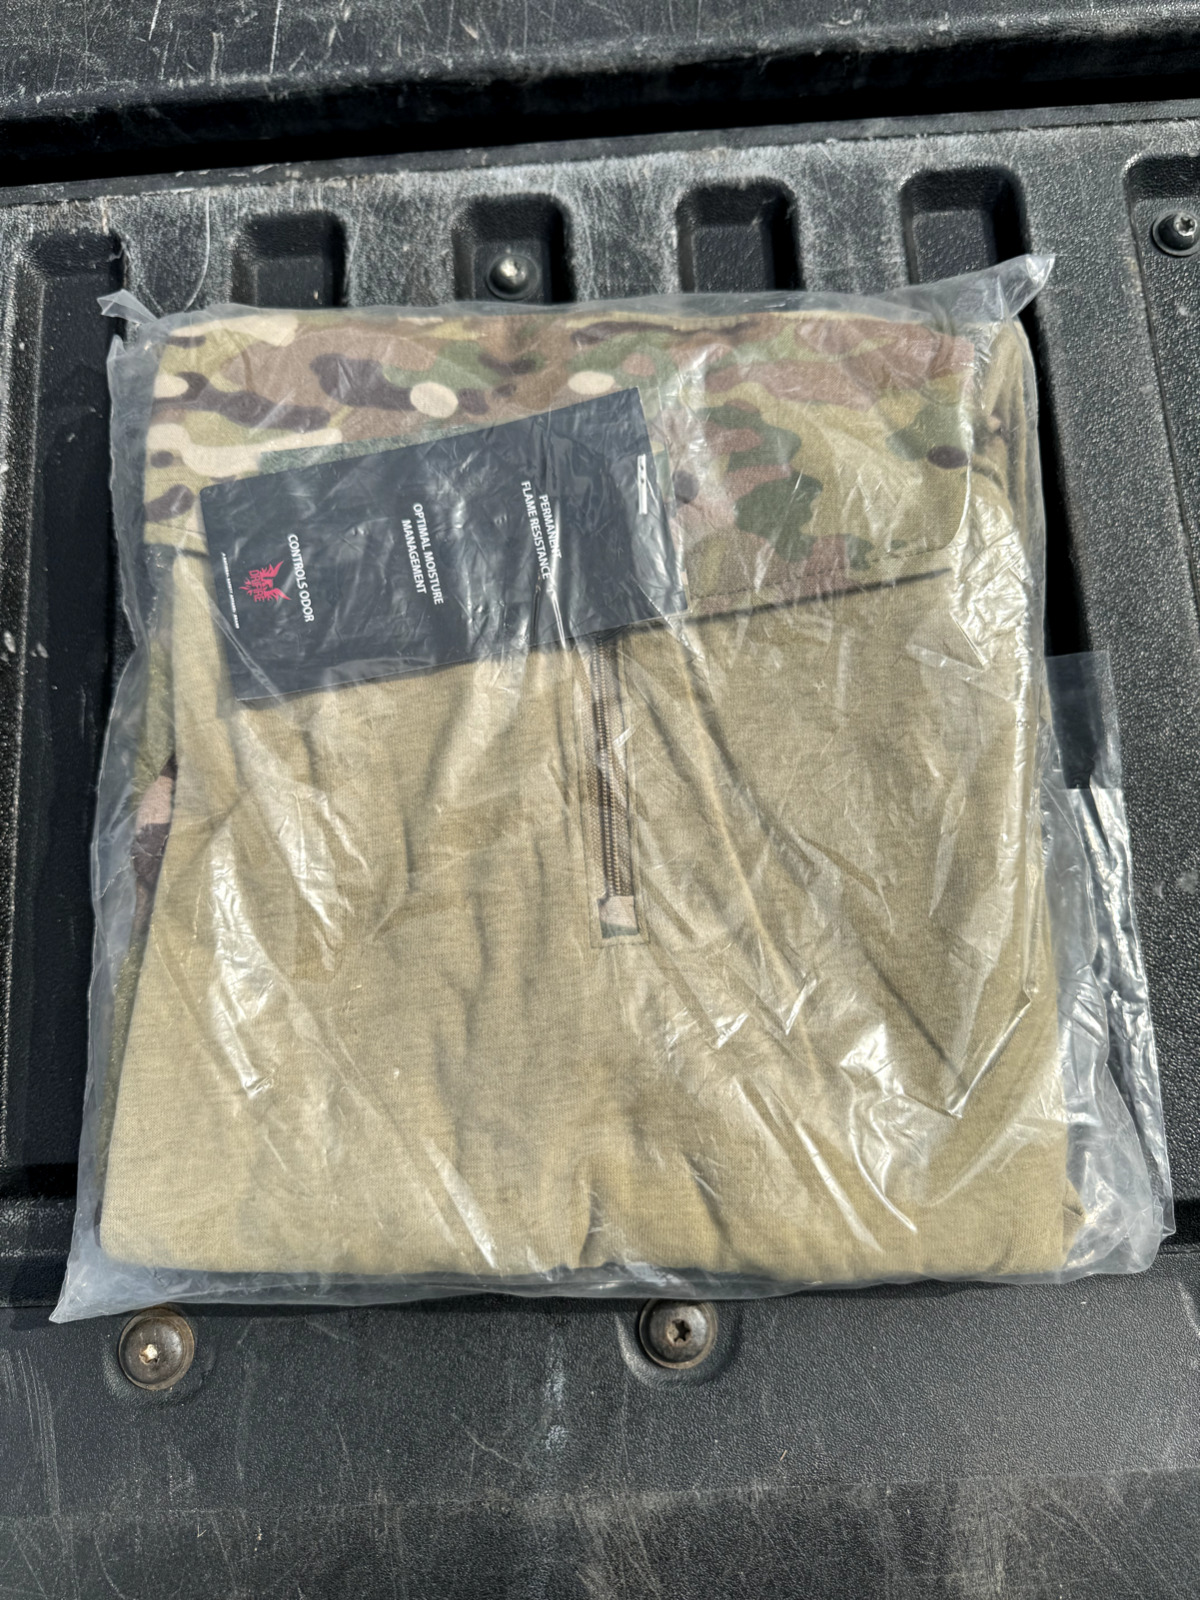 Crye Precision G3 Combat Top, Still In the Original Packaging, Sized Medium Shor